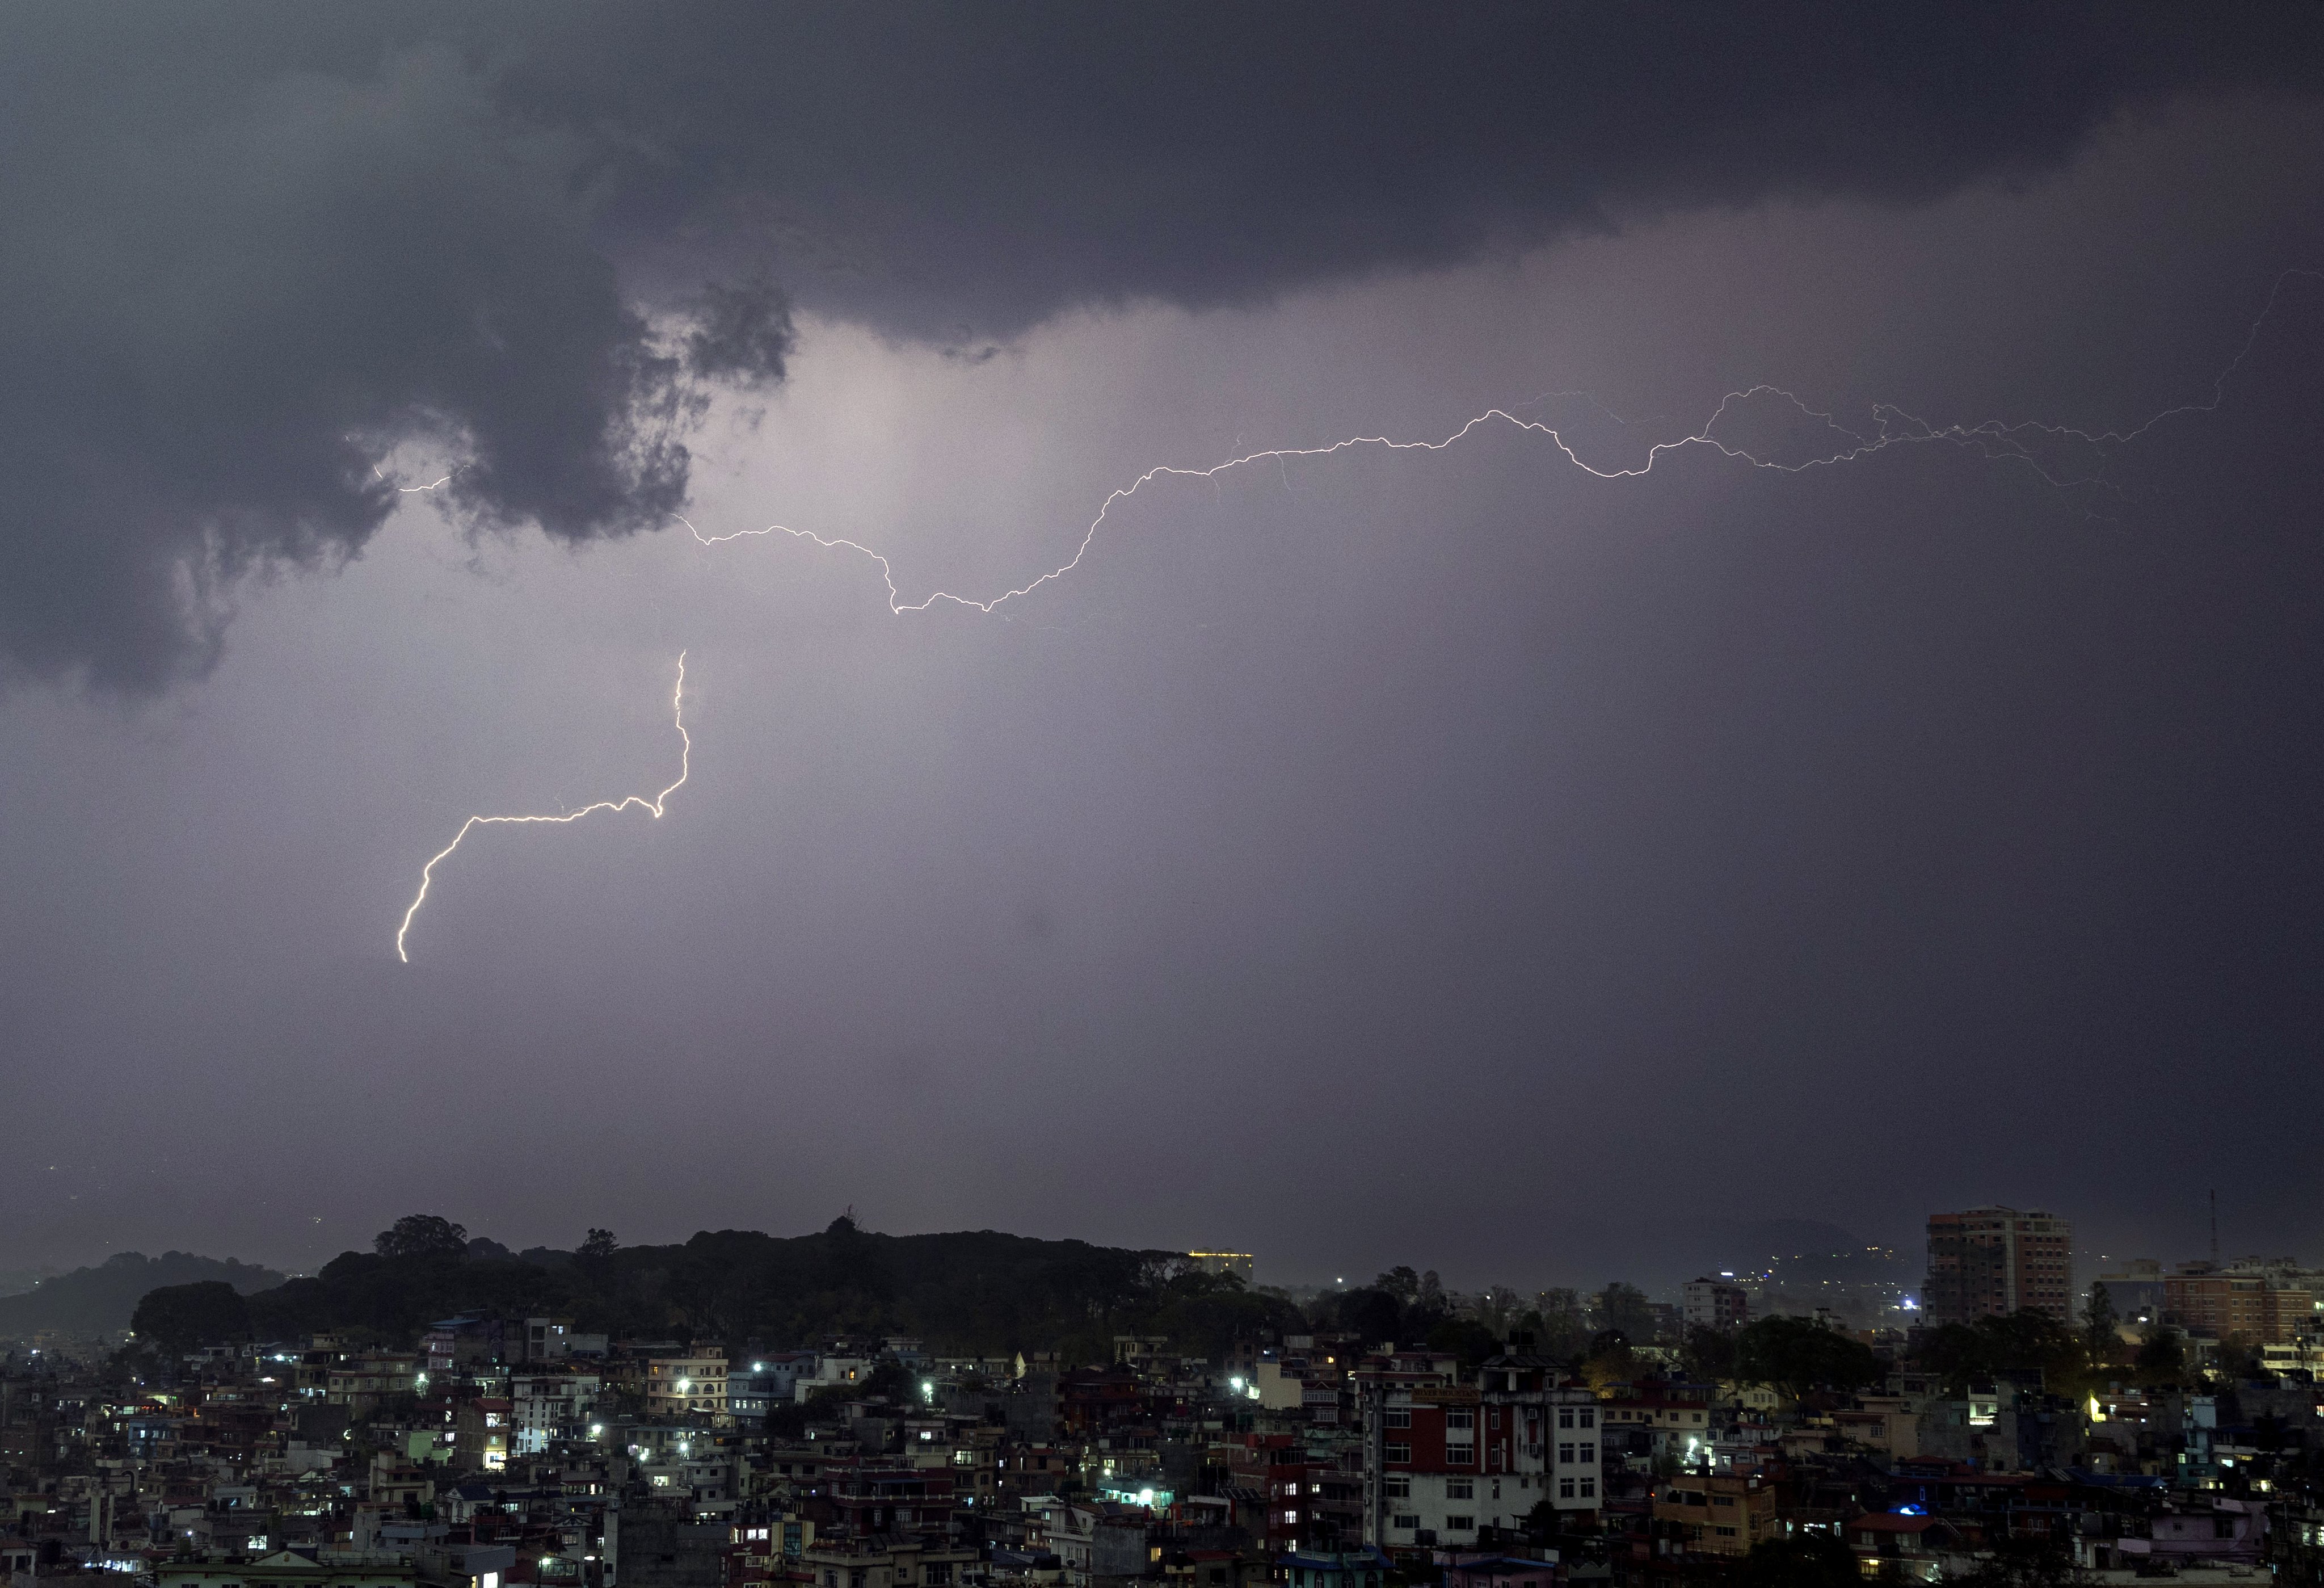 Lightning flashes through the night sky over Kathmandu Valley in Nepal during a heavy storm on March, 31. Photo: EPA-EFE